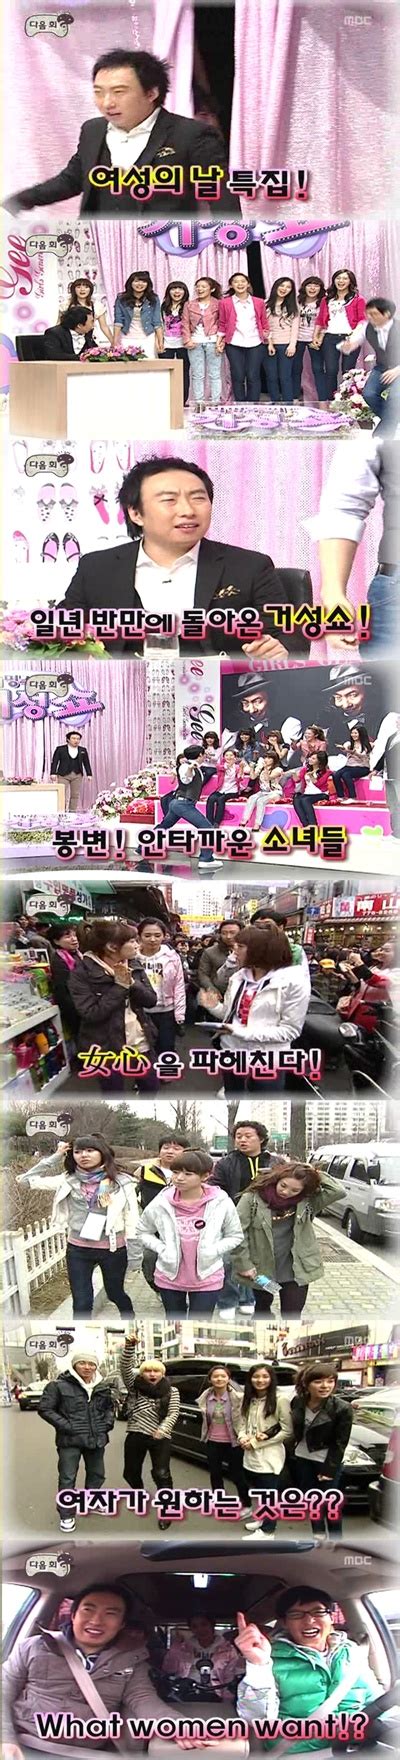 [03 07 09] Snsd’s Surprise Appearance During Infinity Challenge’s ‘revealing Women’s Hearts’ Special